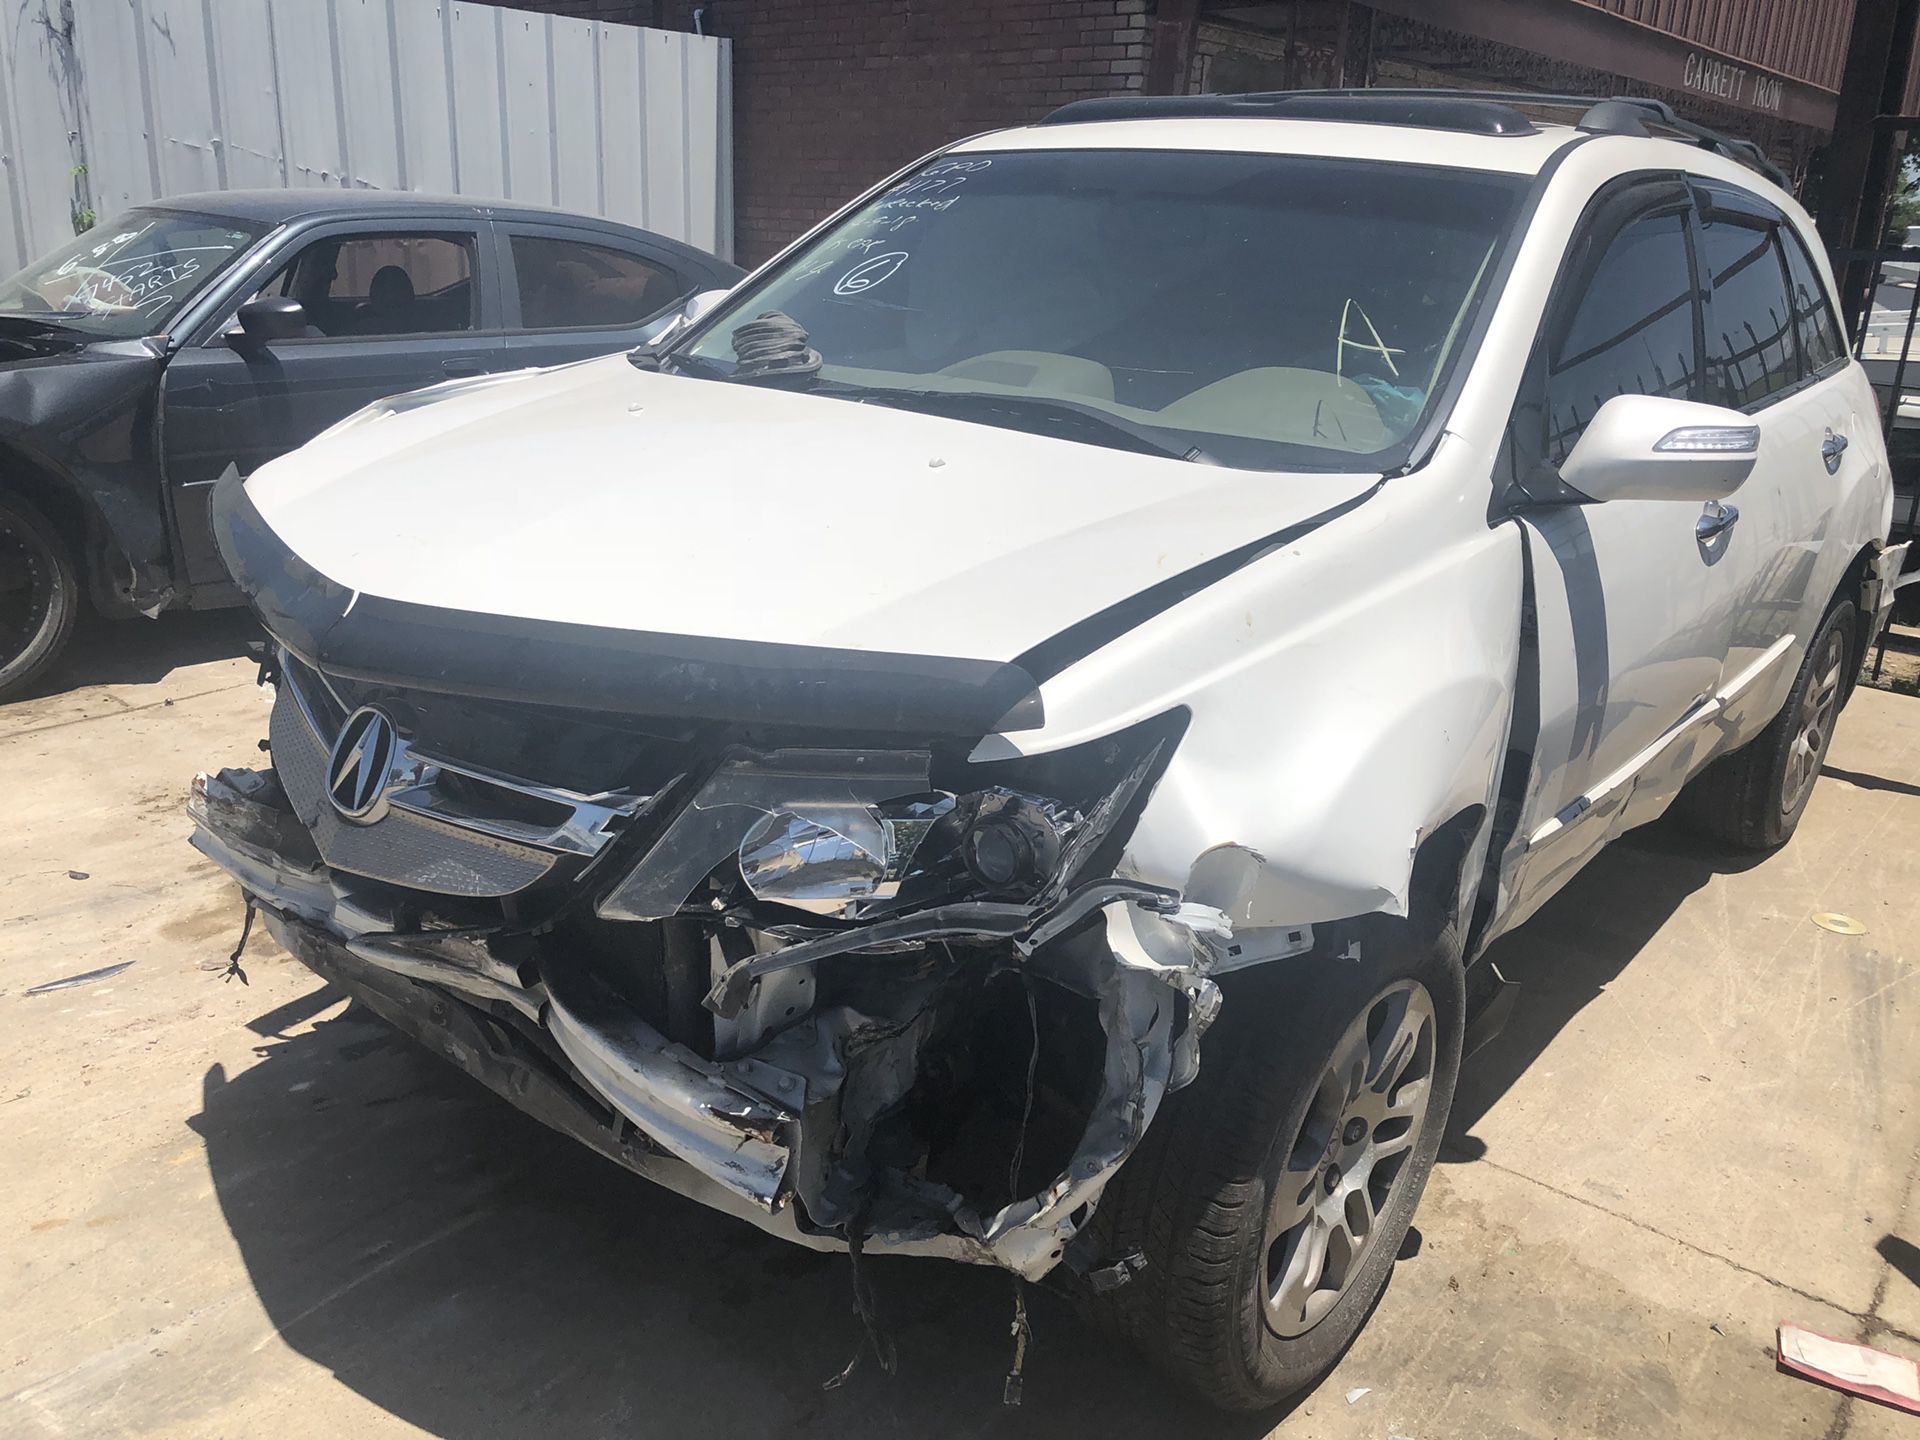 2008 Acura MDX for parts PARTS ONLY